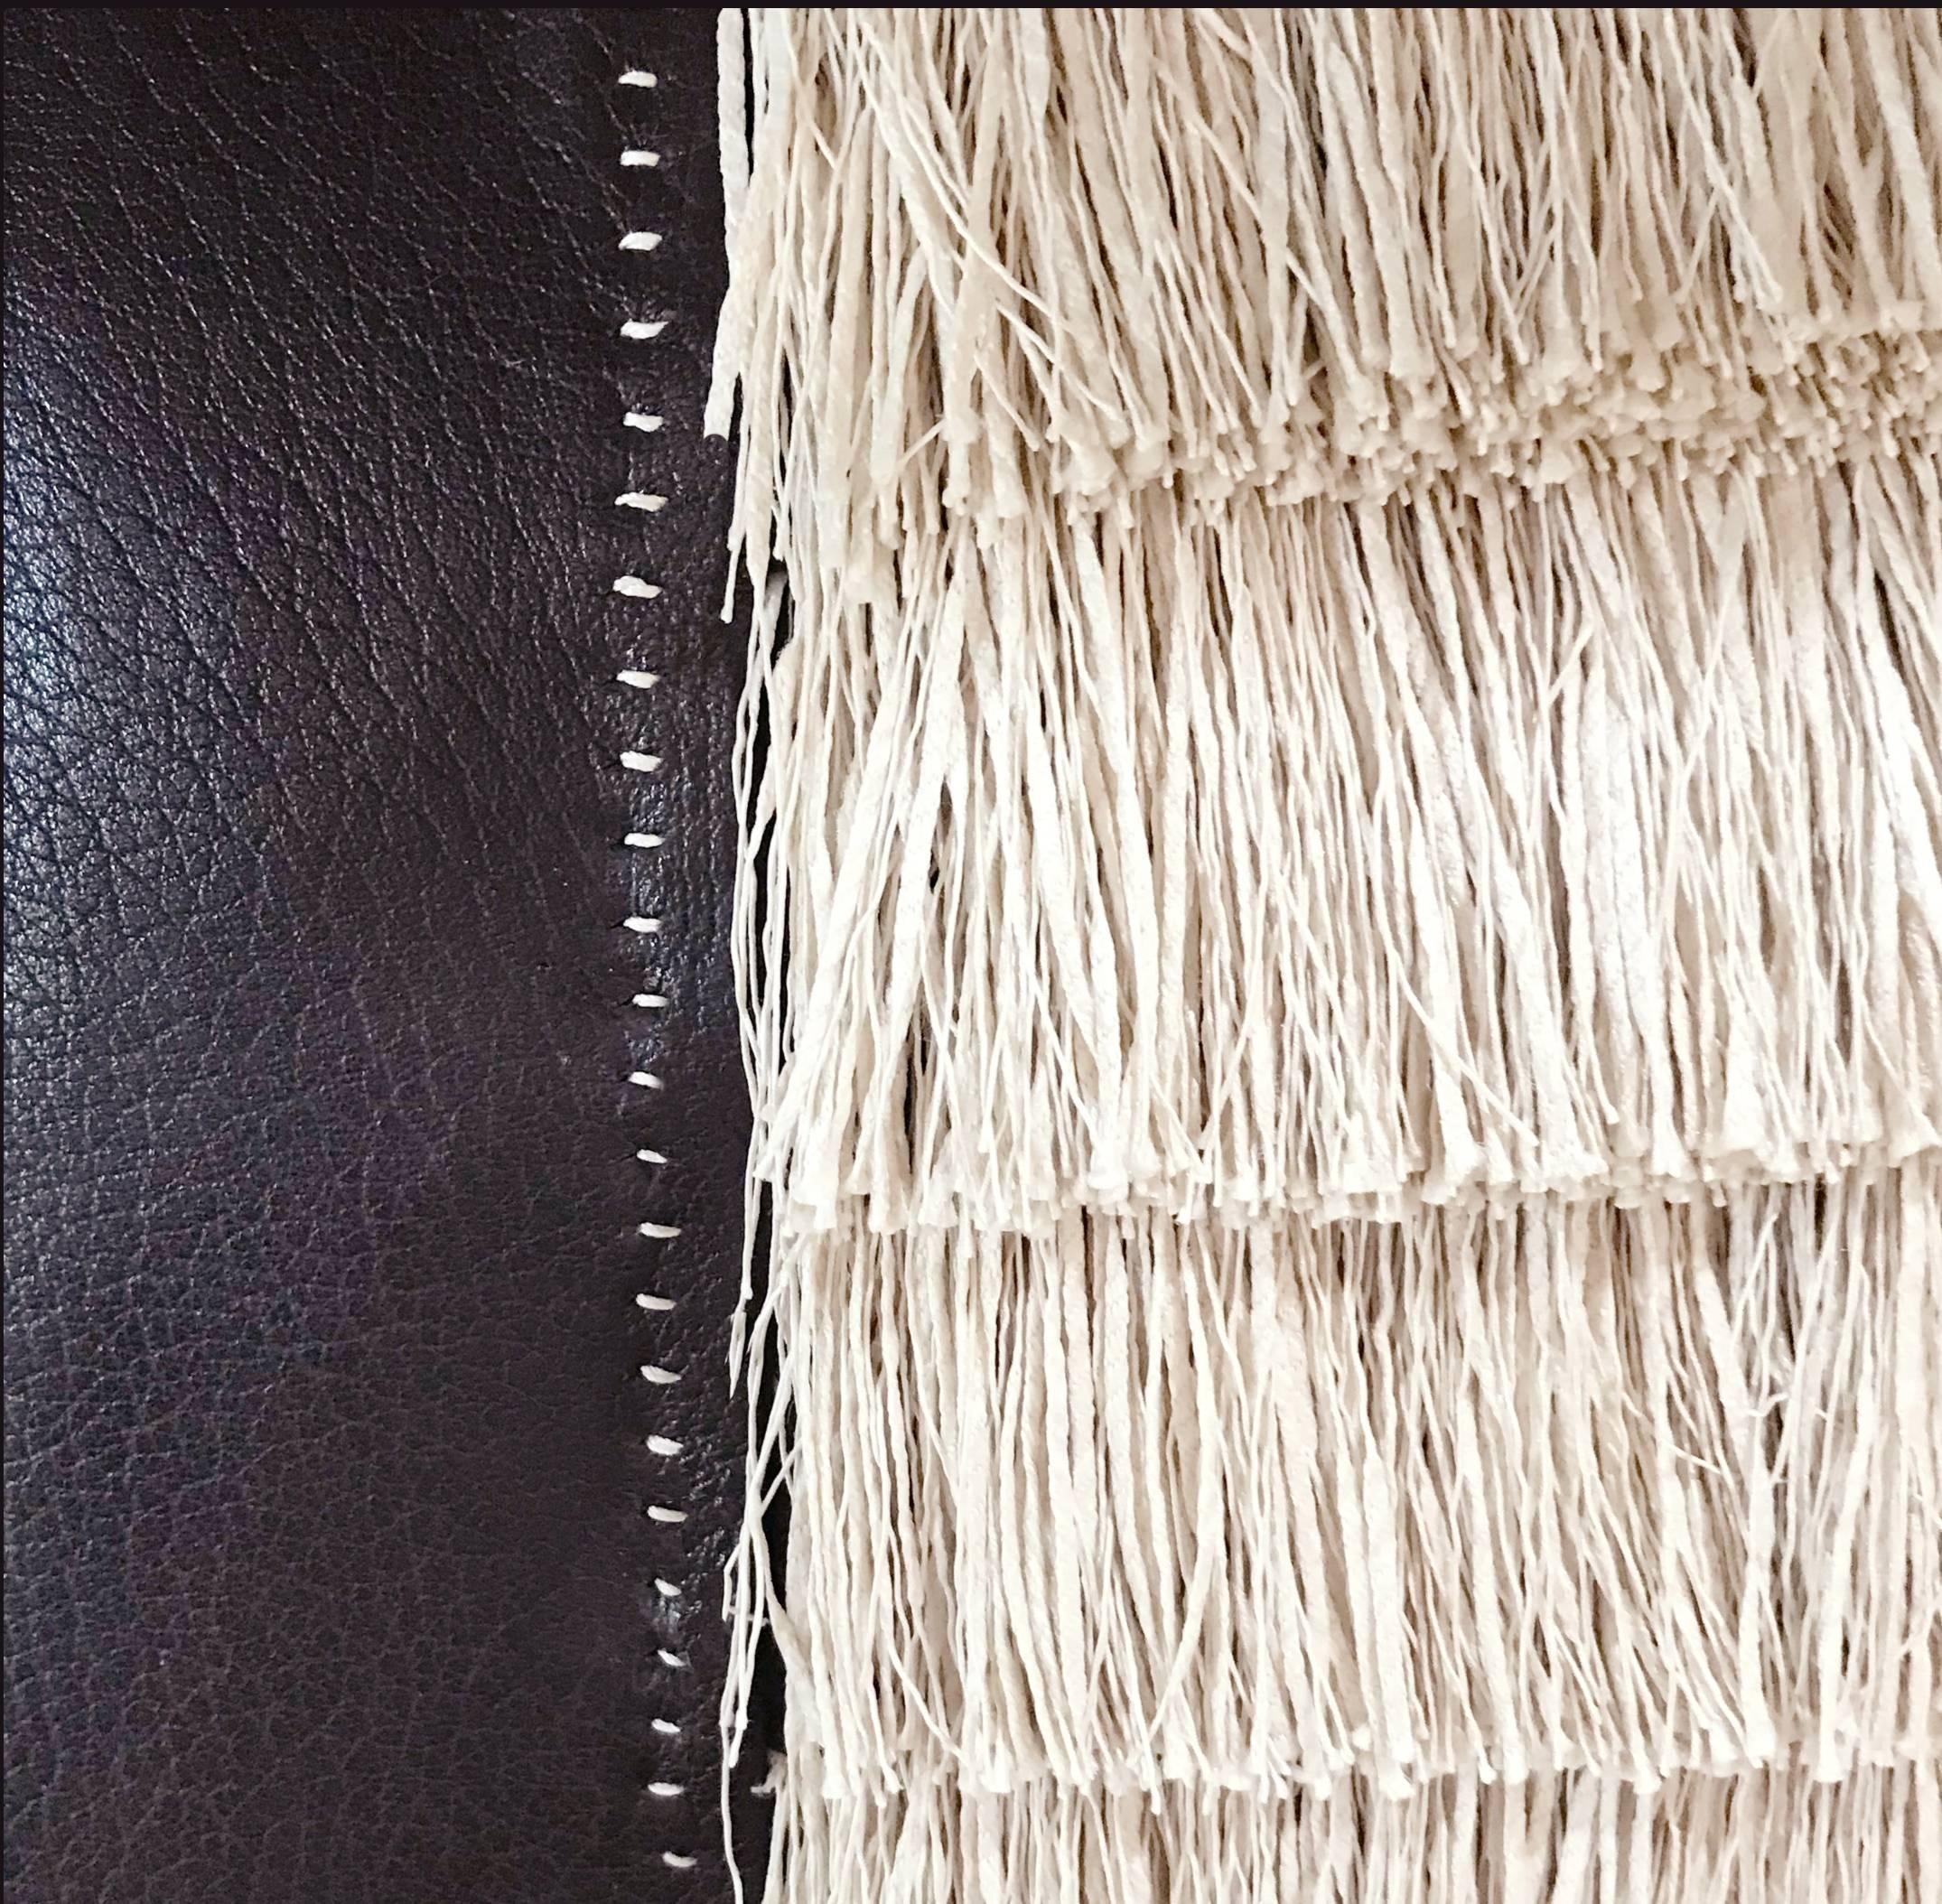 A fine  calf leather has been meticulously hand stitched to showcase the three inch raffia fringe.  The hand stitching and the inset fringe create a truly couture pillow 

Details
	•	Fine calf leather 
	•	Hand stitching detail  
	•	Includes down